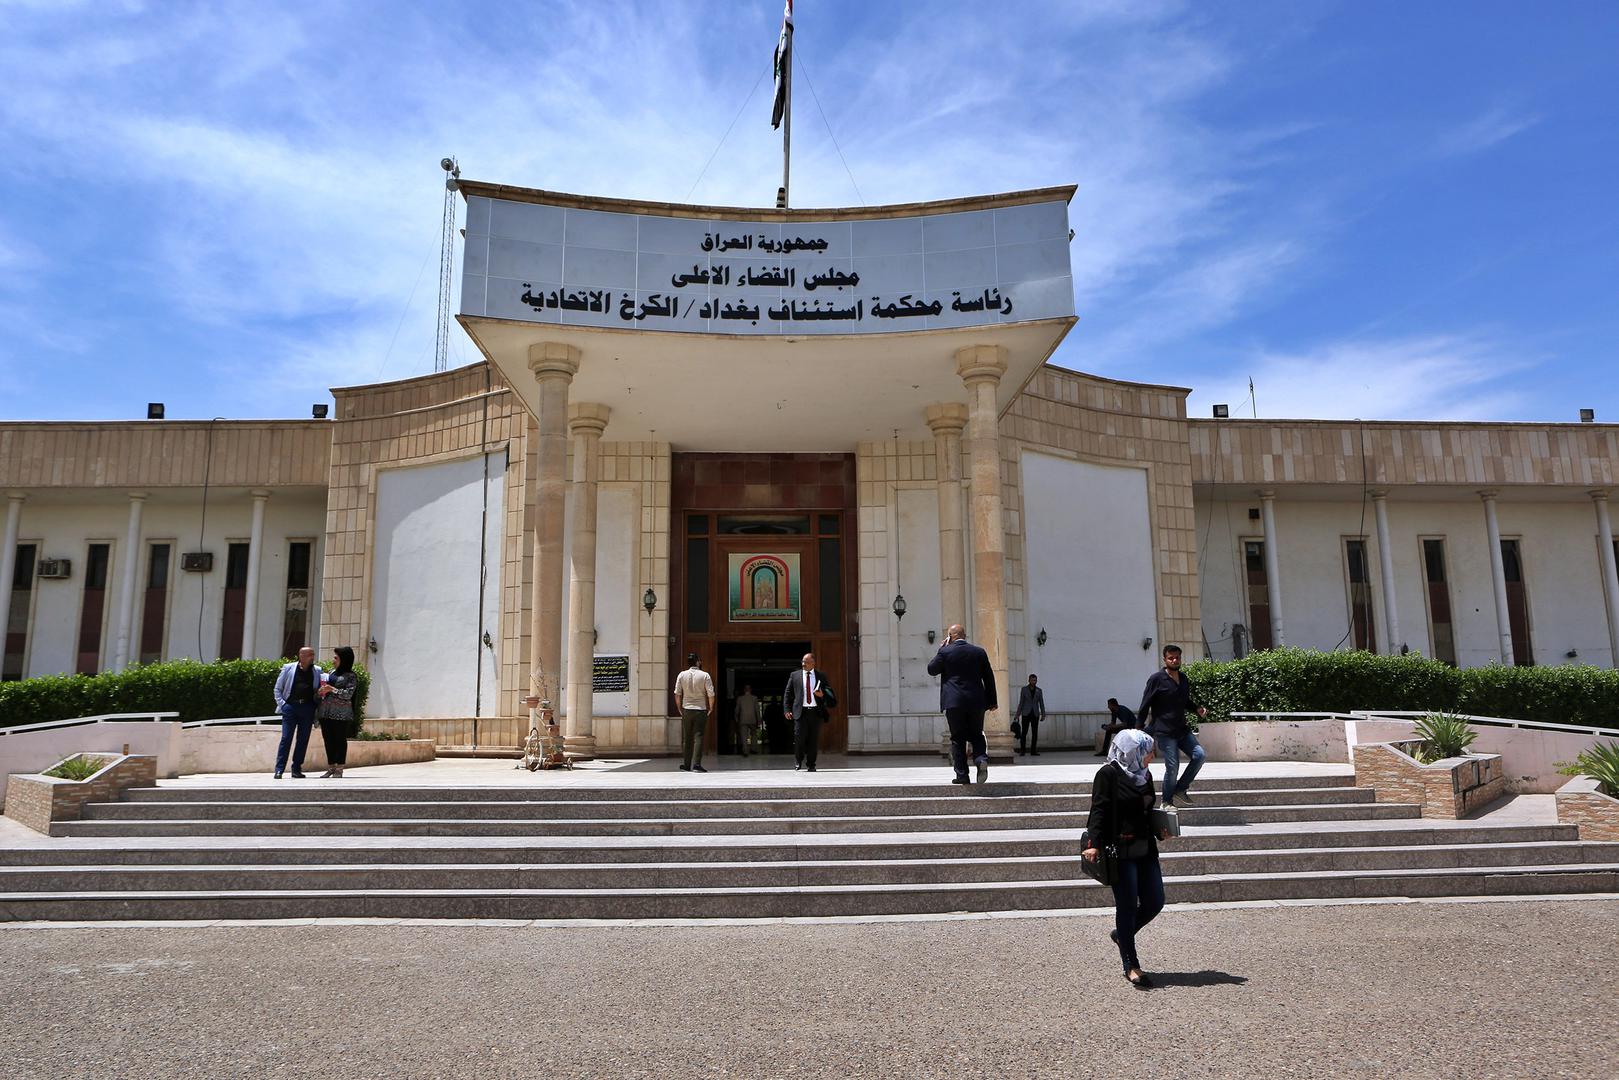 The entrance to the Karkh branch of Iraq’s Central Criminal Court.